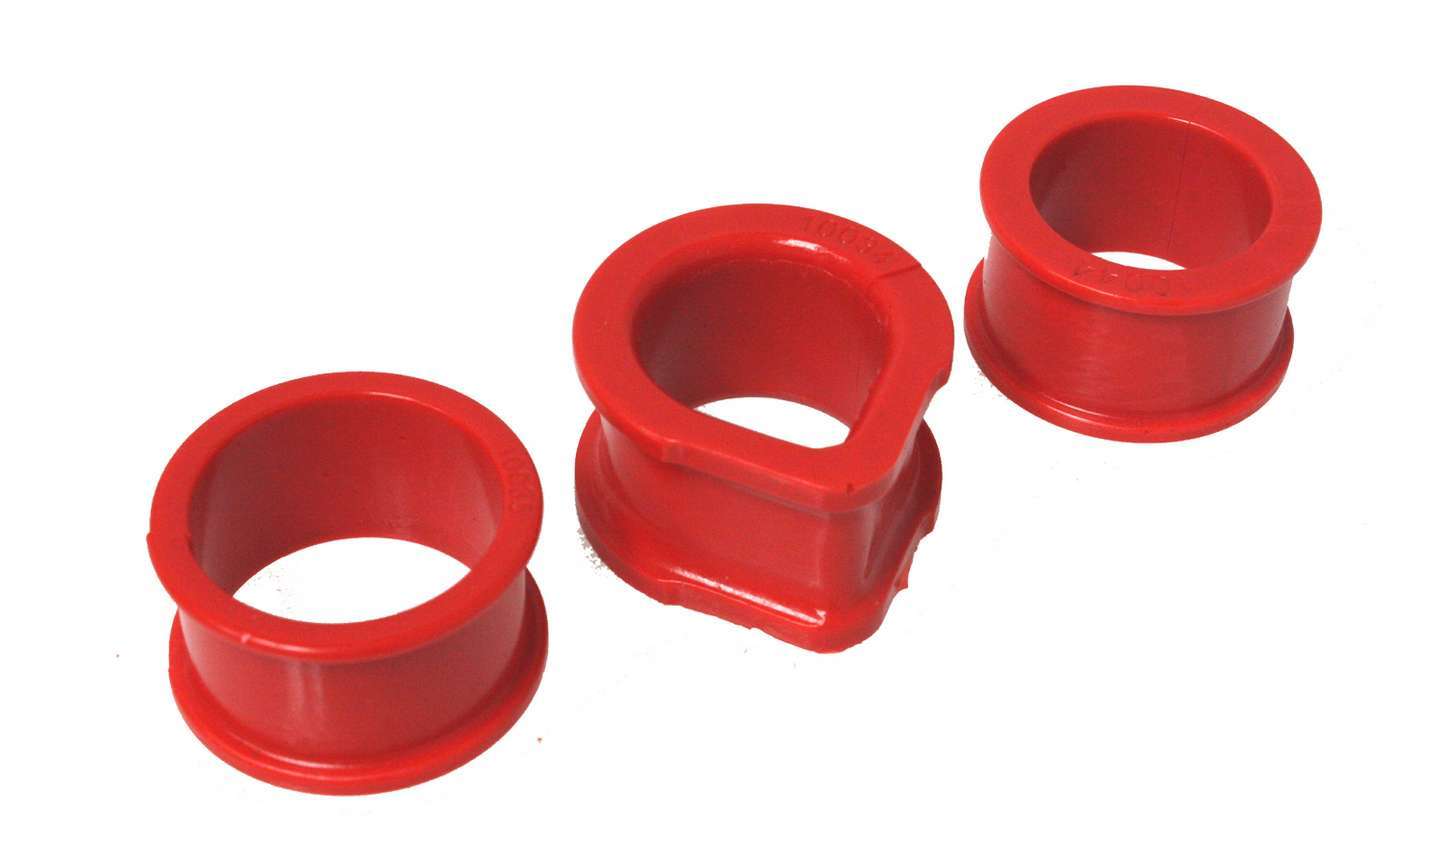 Energy Suspension 7-10104R Rack and Pinion Bushing, Polyurethane, Red, Nissan 300ZX 1900-96, Kit